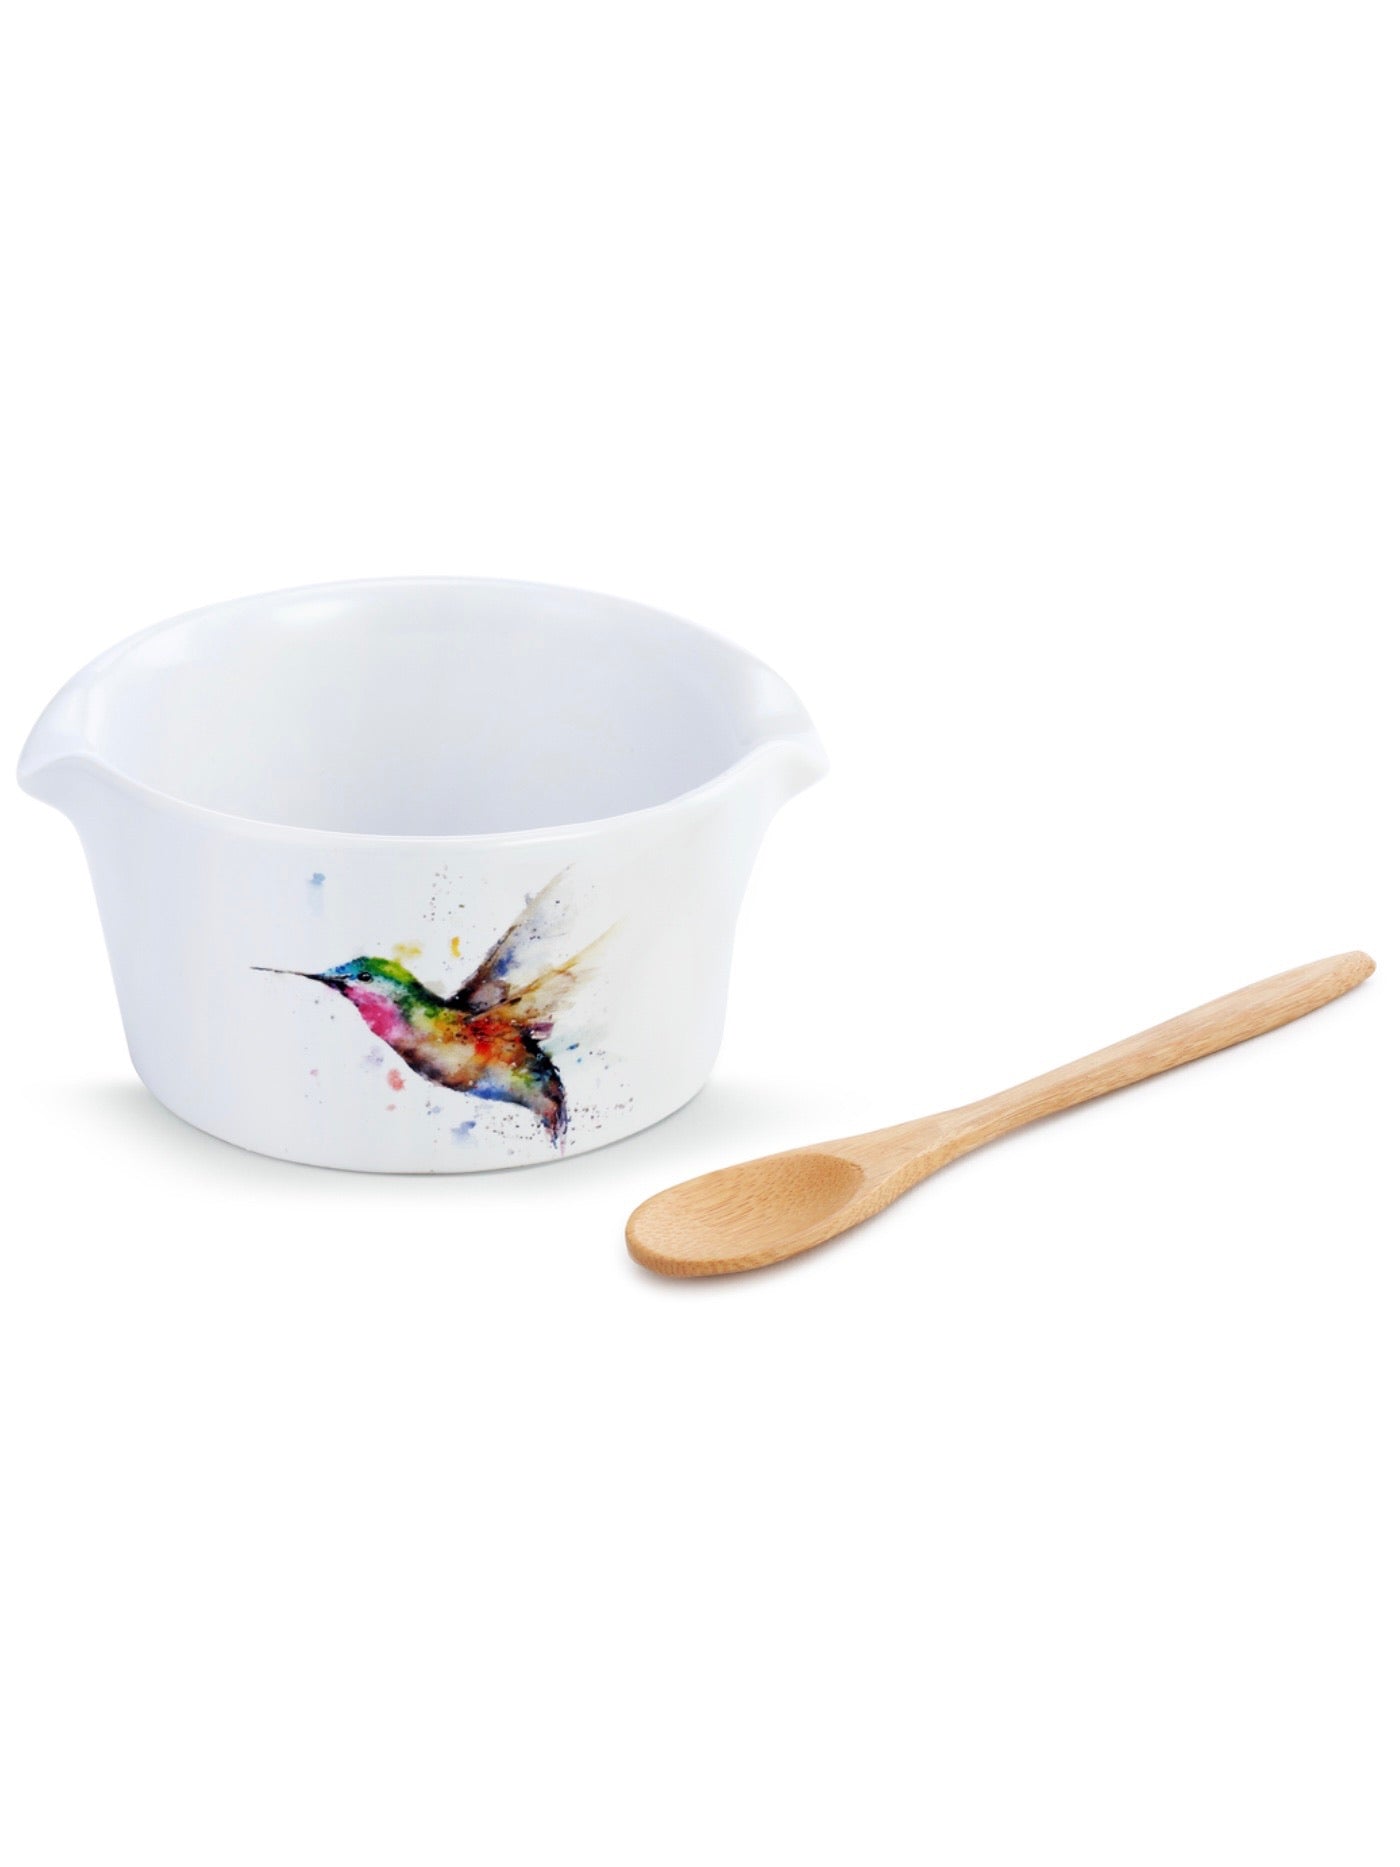 Incoming Hummingbird Appetizer Bowl with Spoon